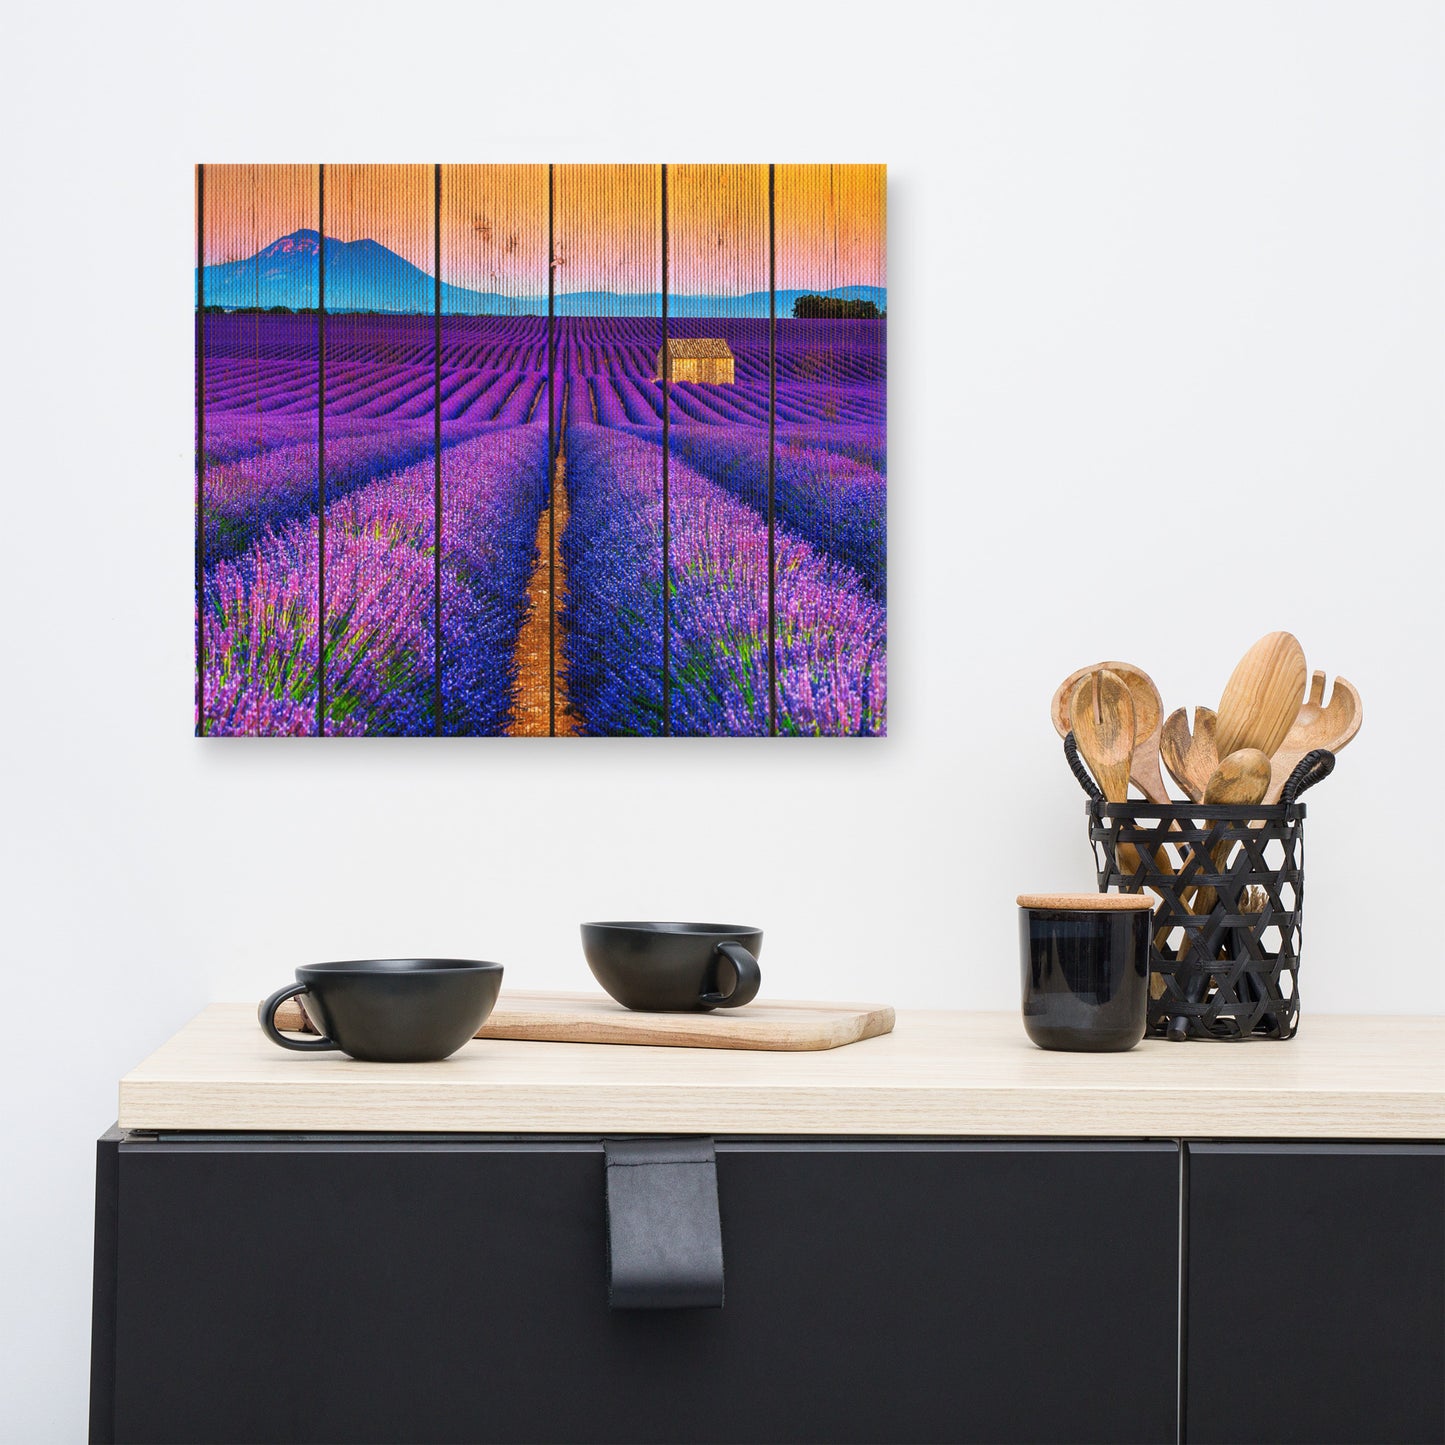 Faux Wood Lavender Fields and Sunset Rural Landscape Canvas Wall Art Prints